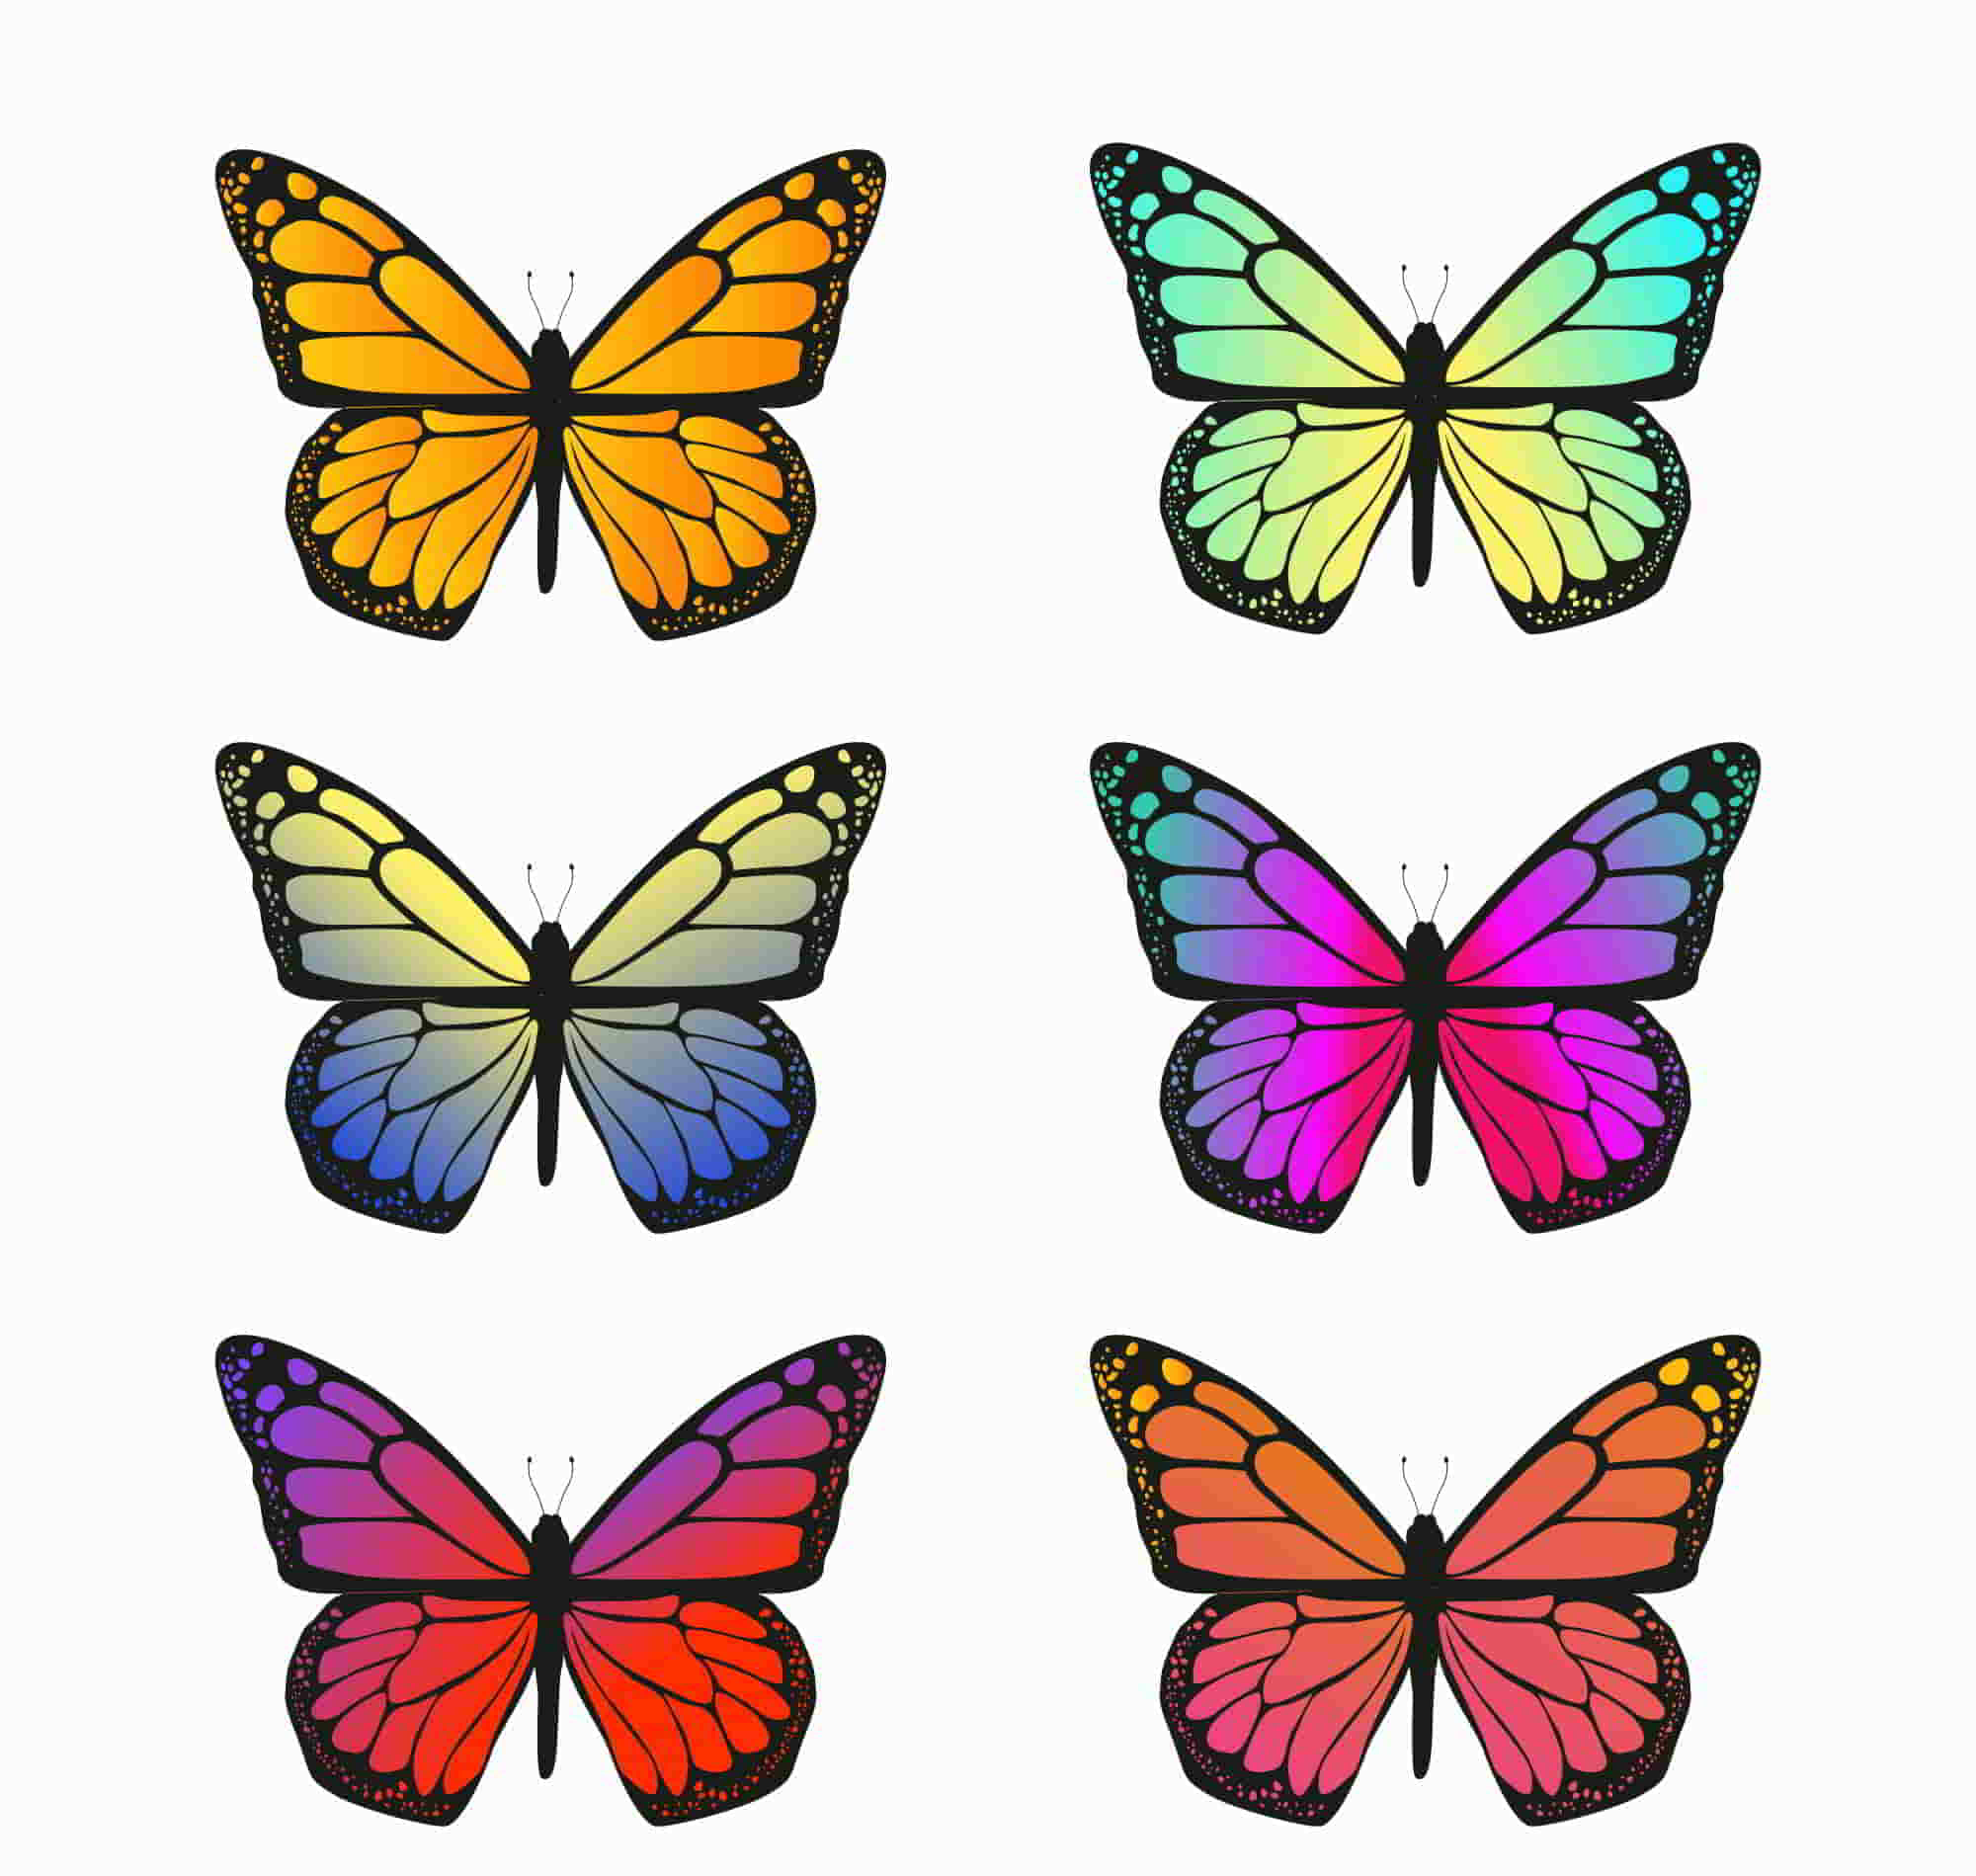 Isolated Butterfly Gradient Illustration Set Free Vector